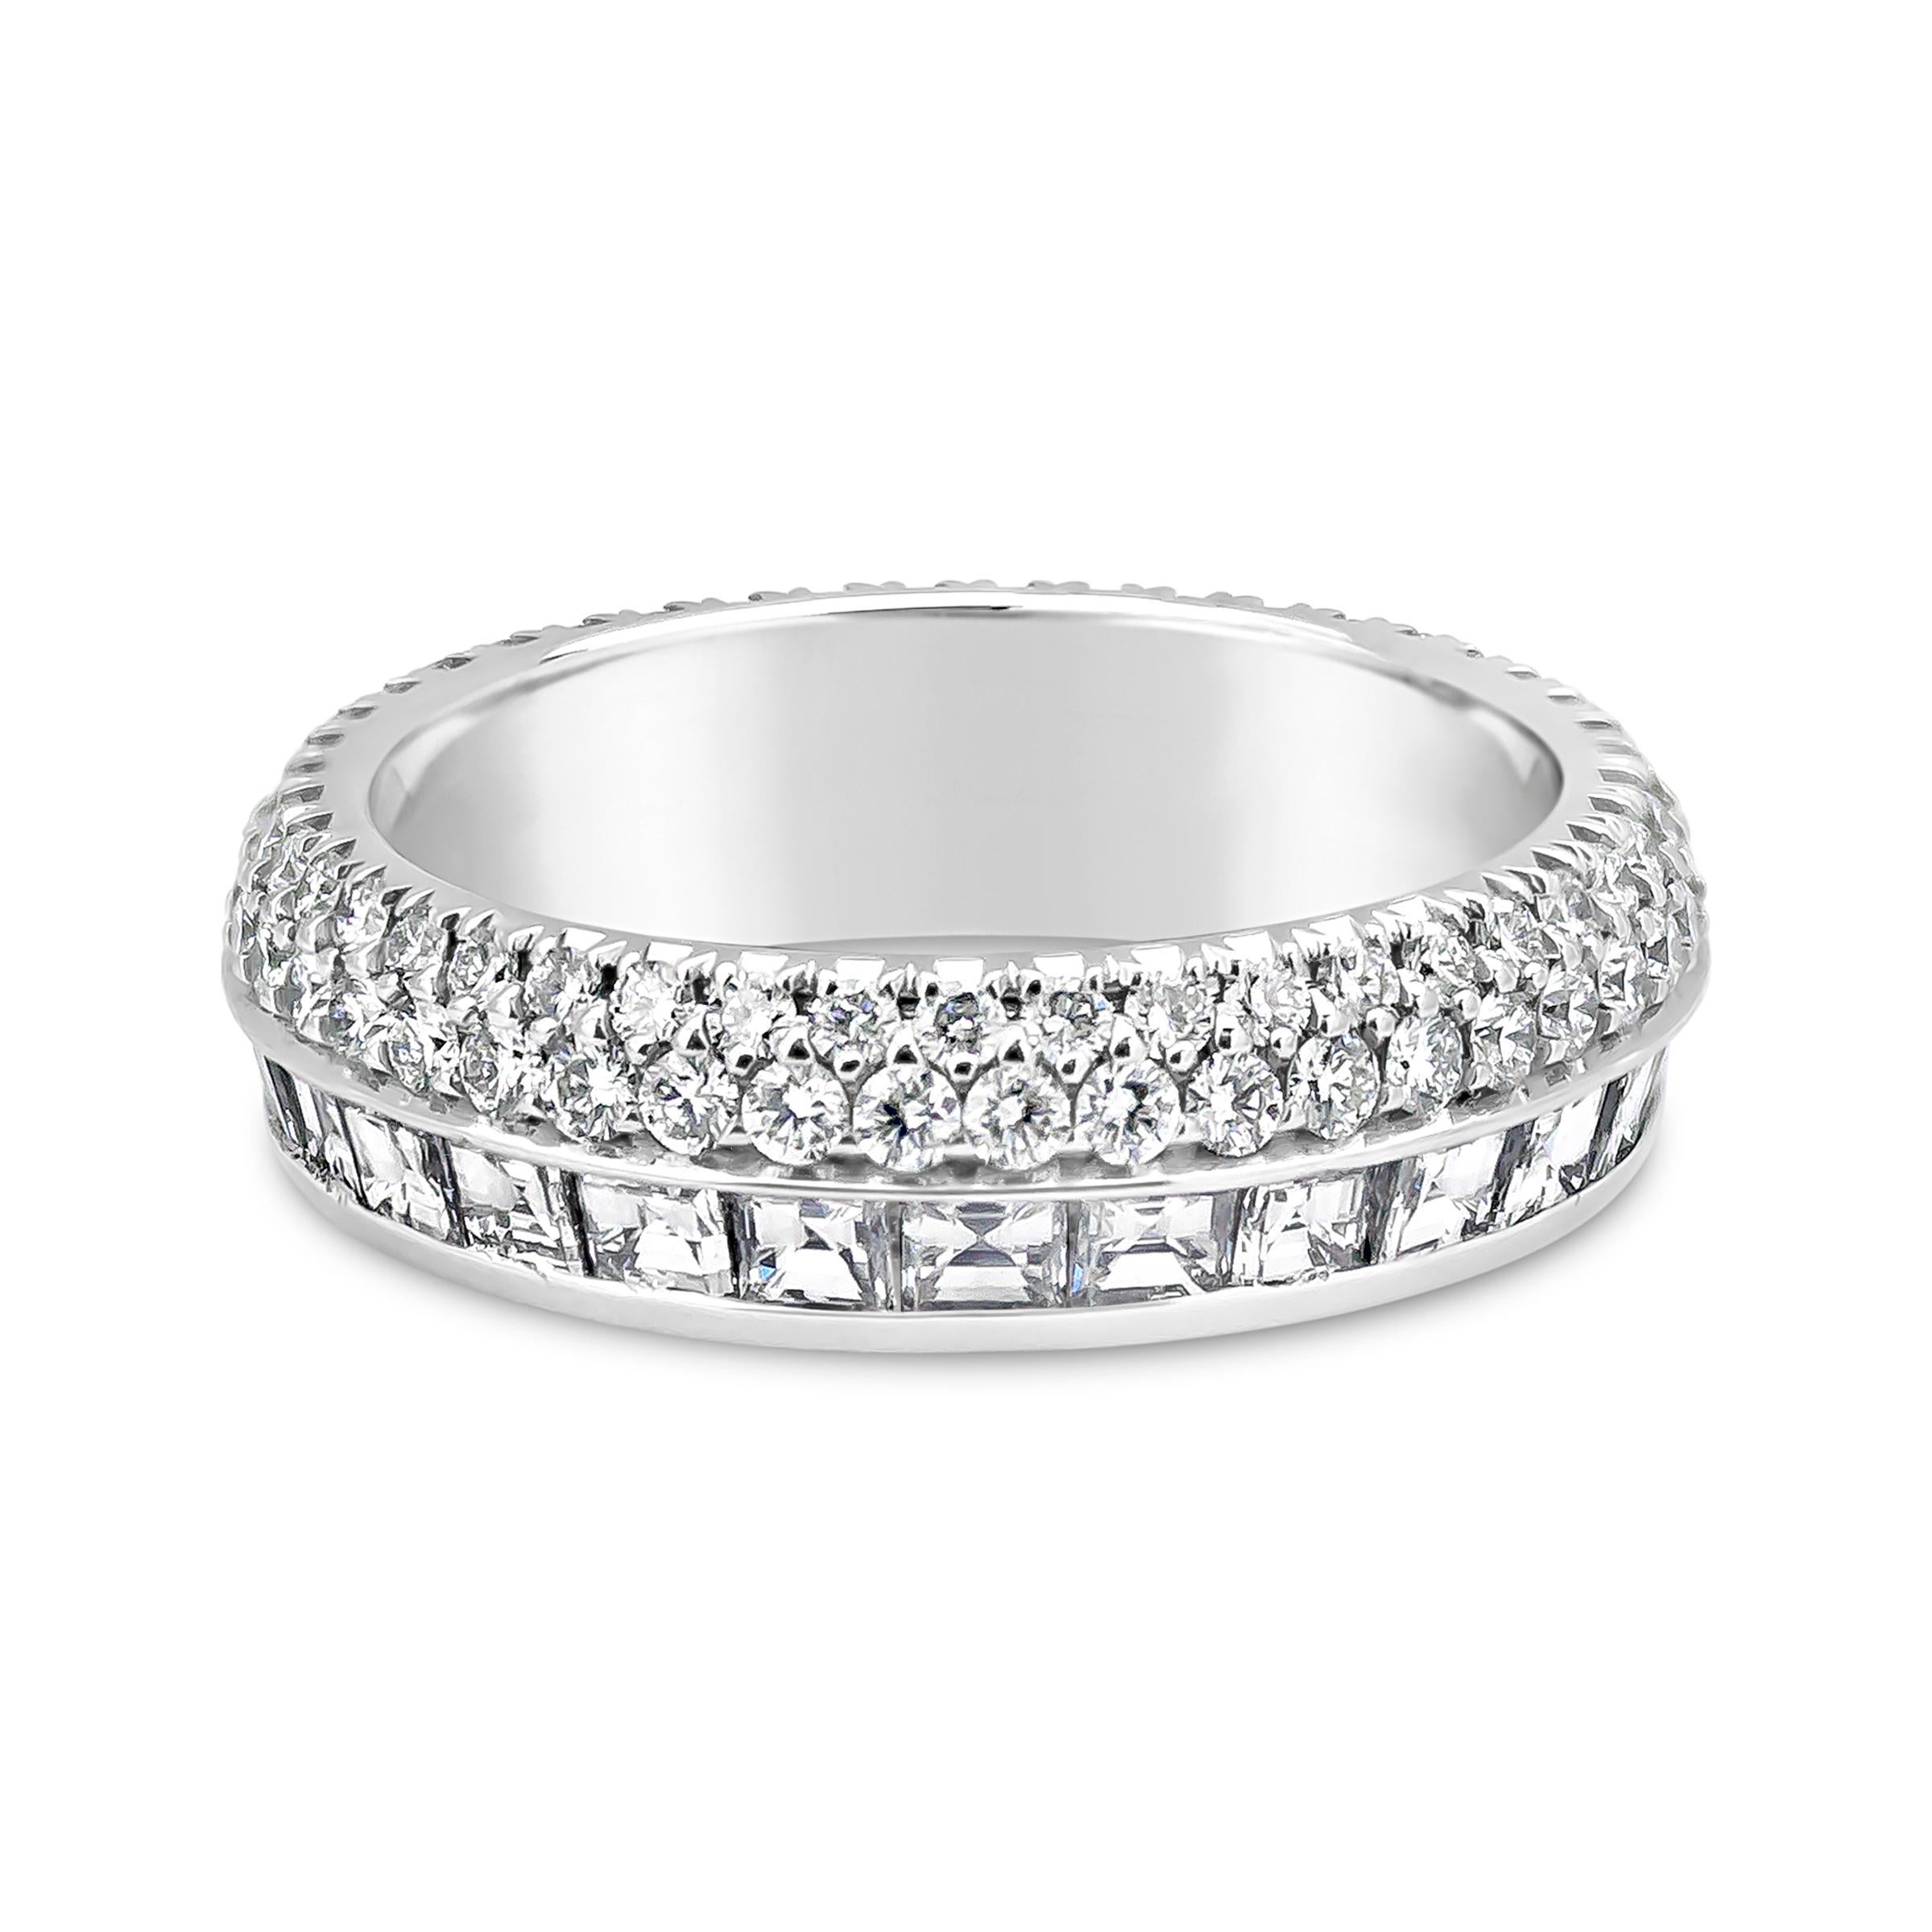 A modern and chic wedding band style showcasing a row of emerald cut diamonds weighing 1.98 carats, and round brilliant diamonds weighing 0.98 carats total, in 18K palladium. The ring is designed to be reversible with either emerald or round